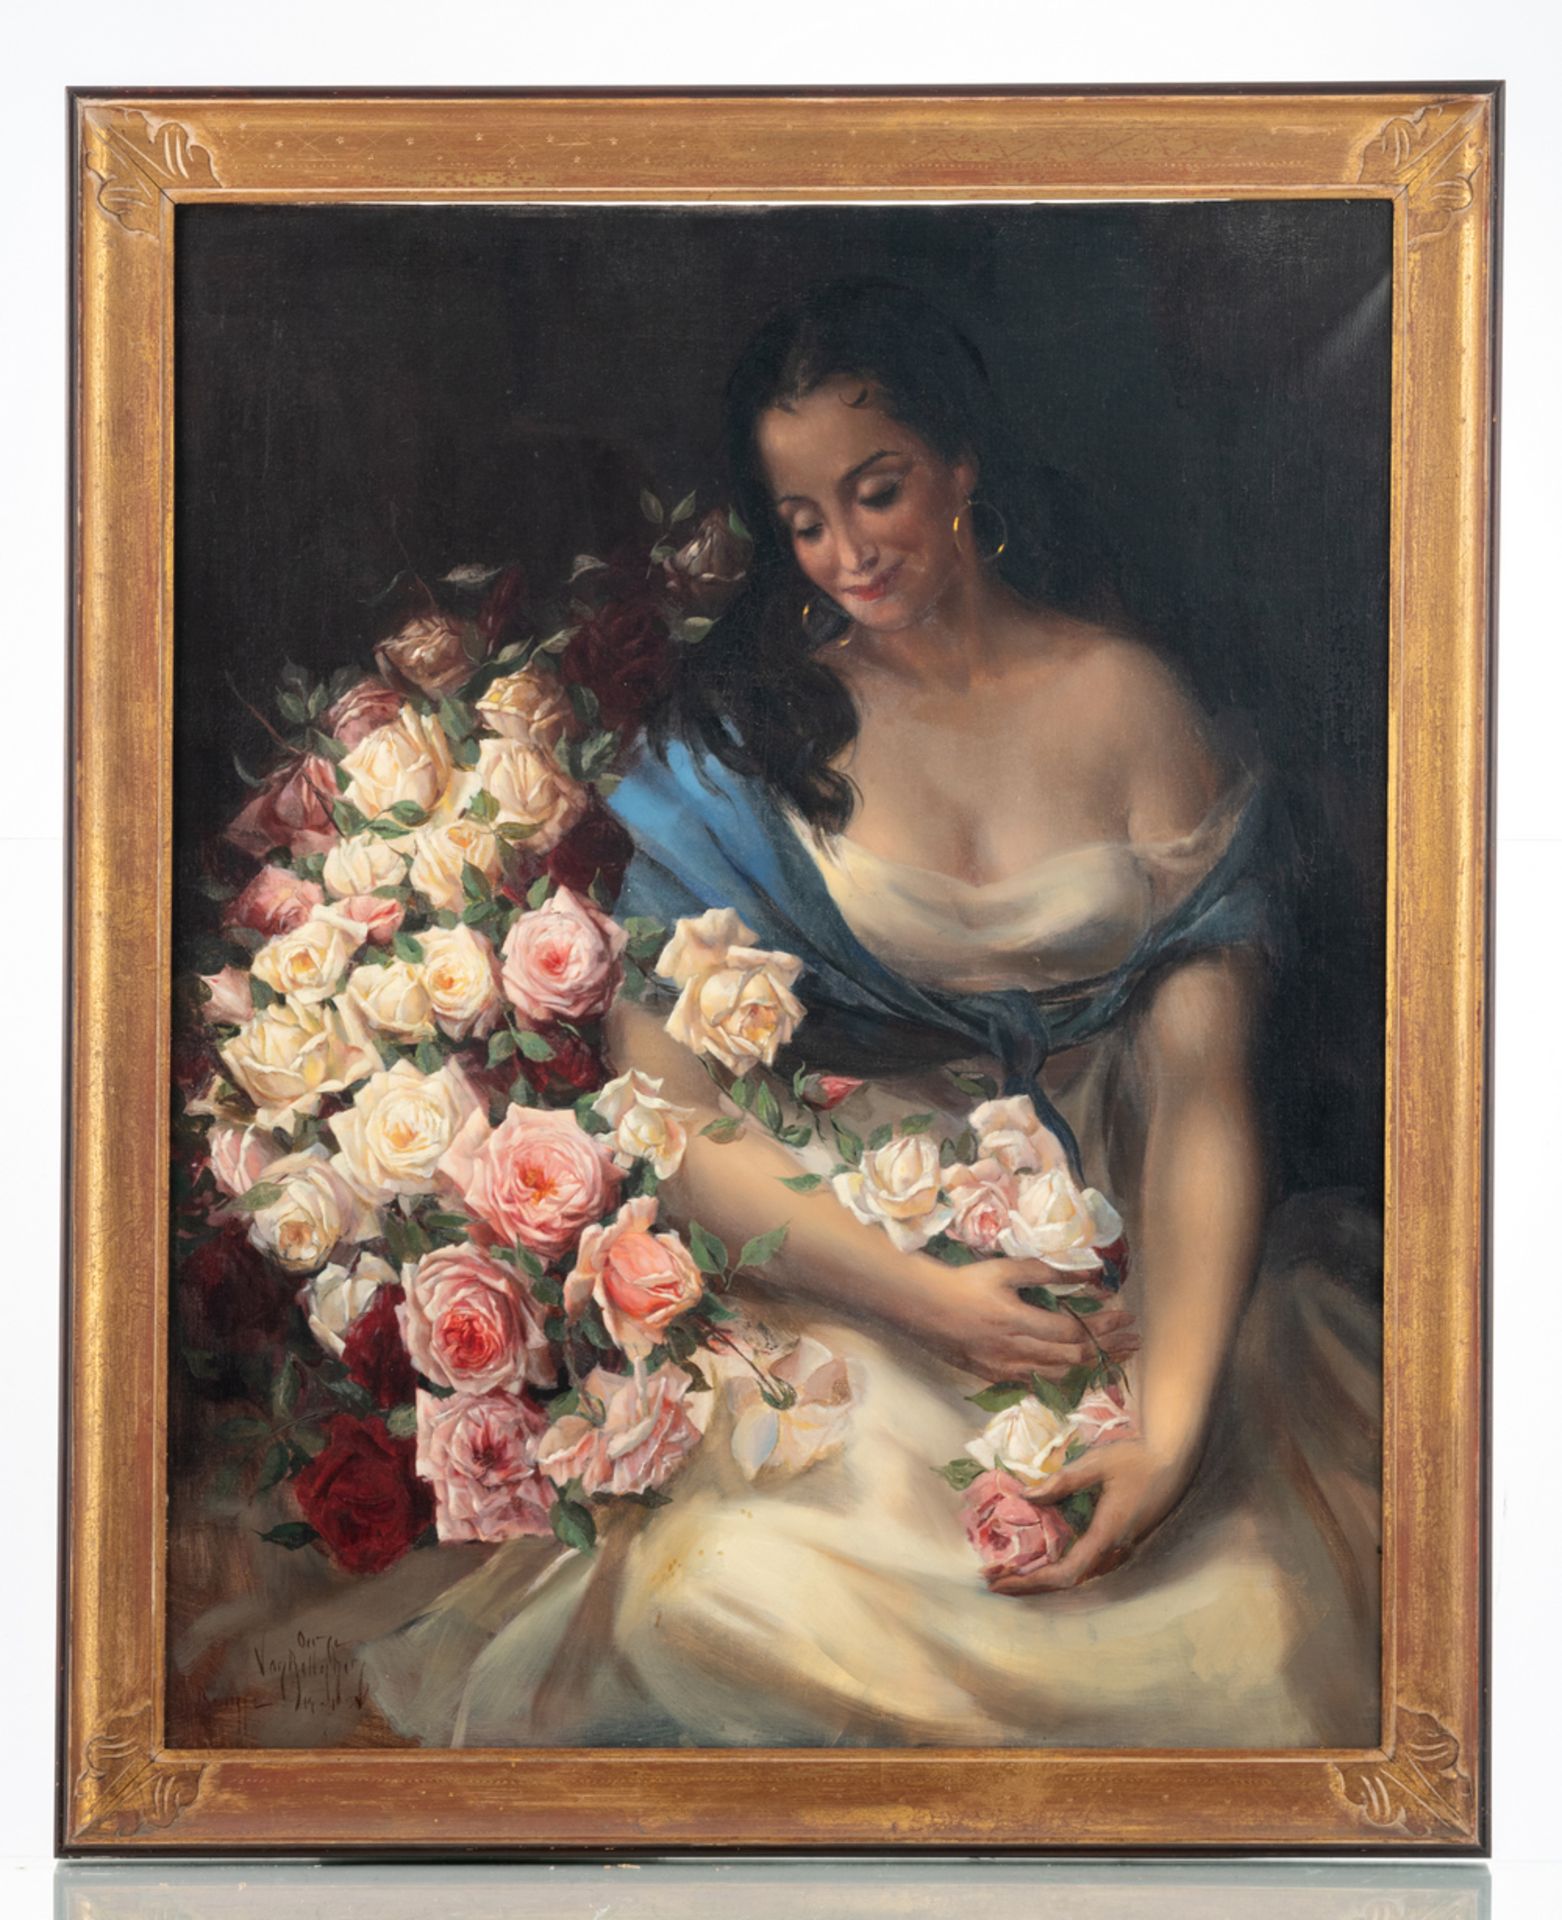 Van Belleghem A., a Gypsy girl surrounded by roses, oil on canvas, 80 x 99 cm - Image 2 of 4